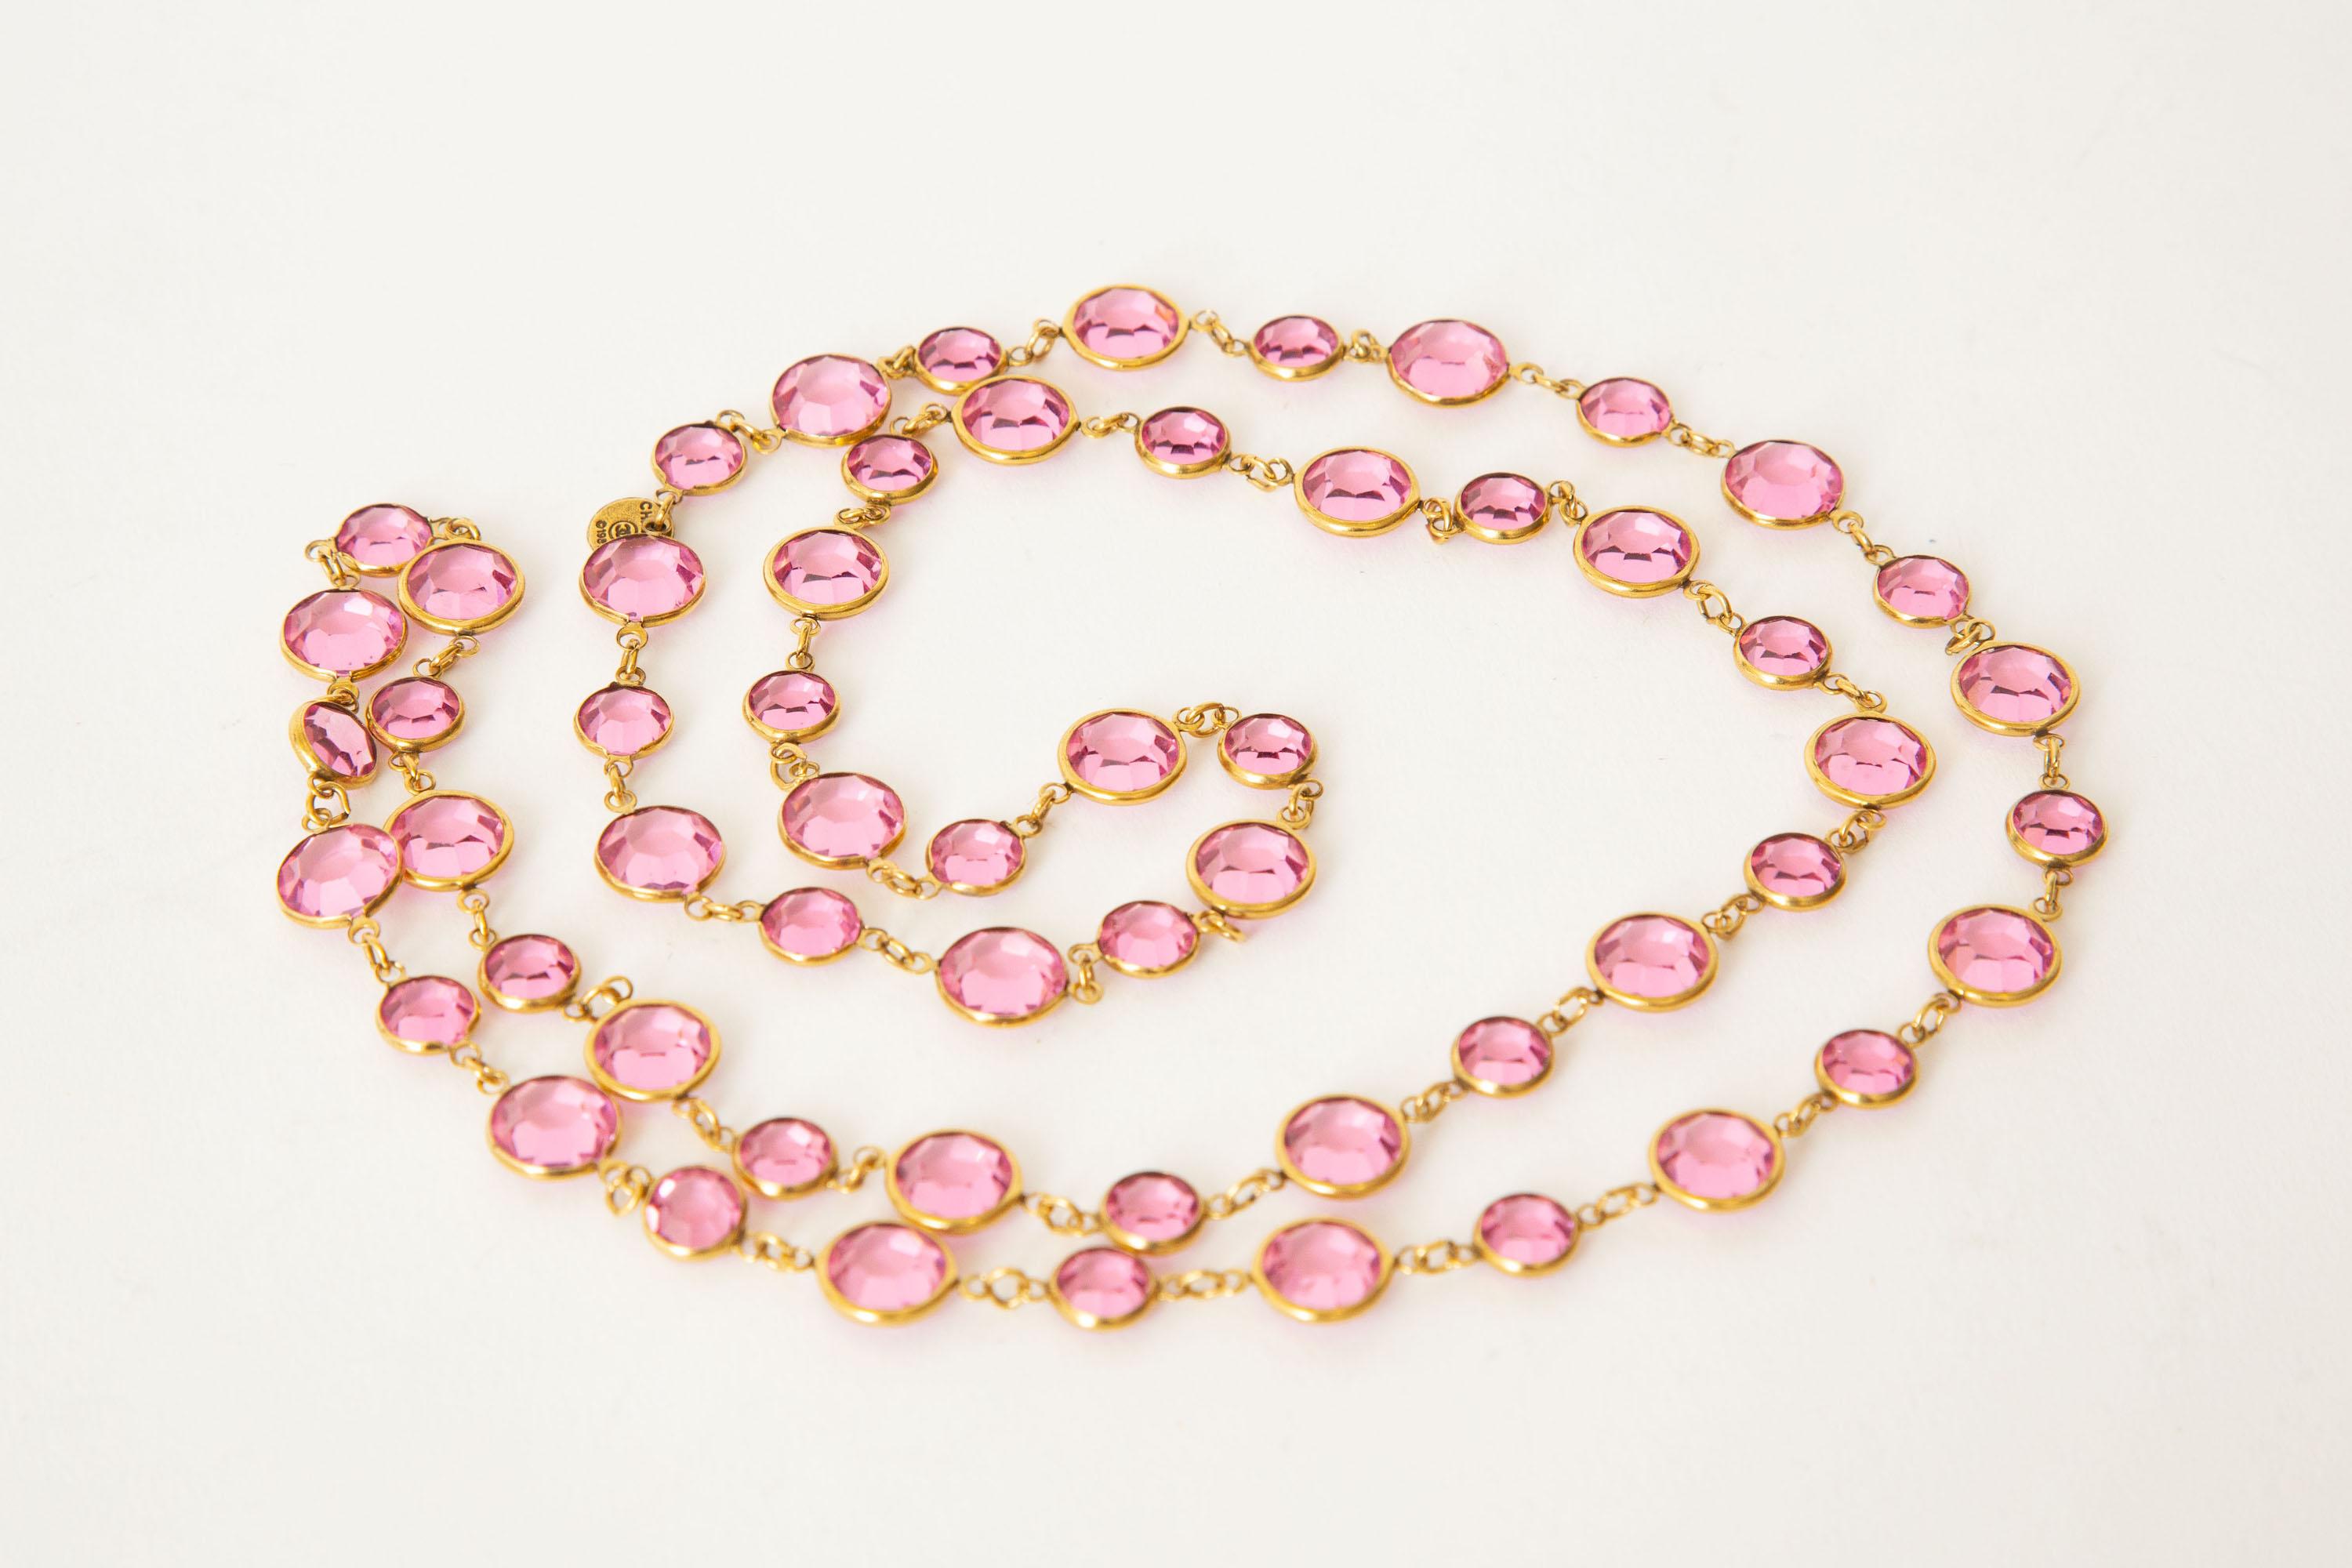 This ever so chic hot pink Chanel sautoir necklace is faceted crystals set against gold metal. The tag says Chanel 1981. Pink is a hard color to find in Chanel now. Are you ready for spring and lightness? This is happiness. These can be doubled or